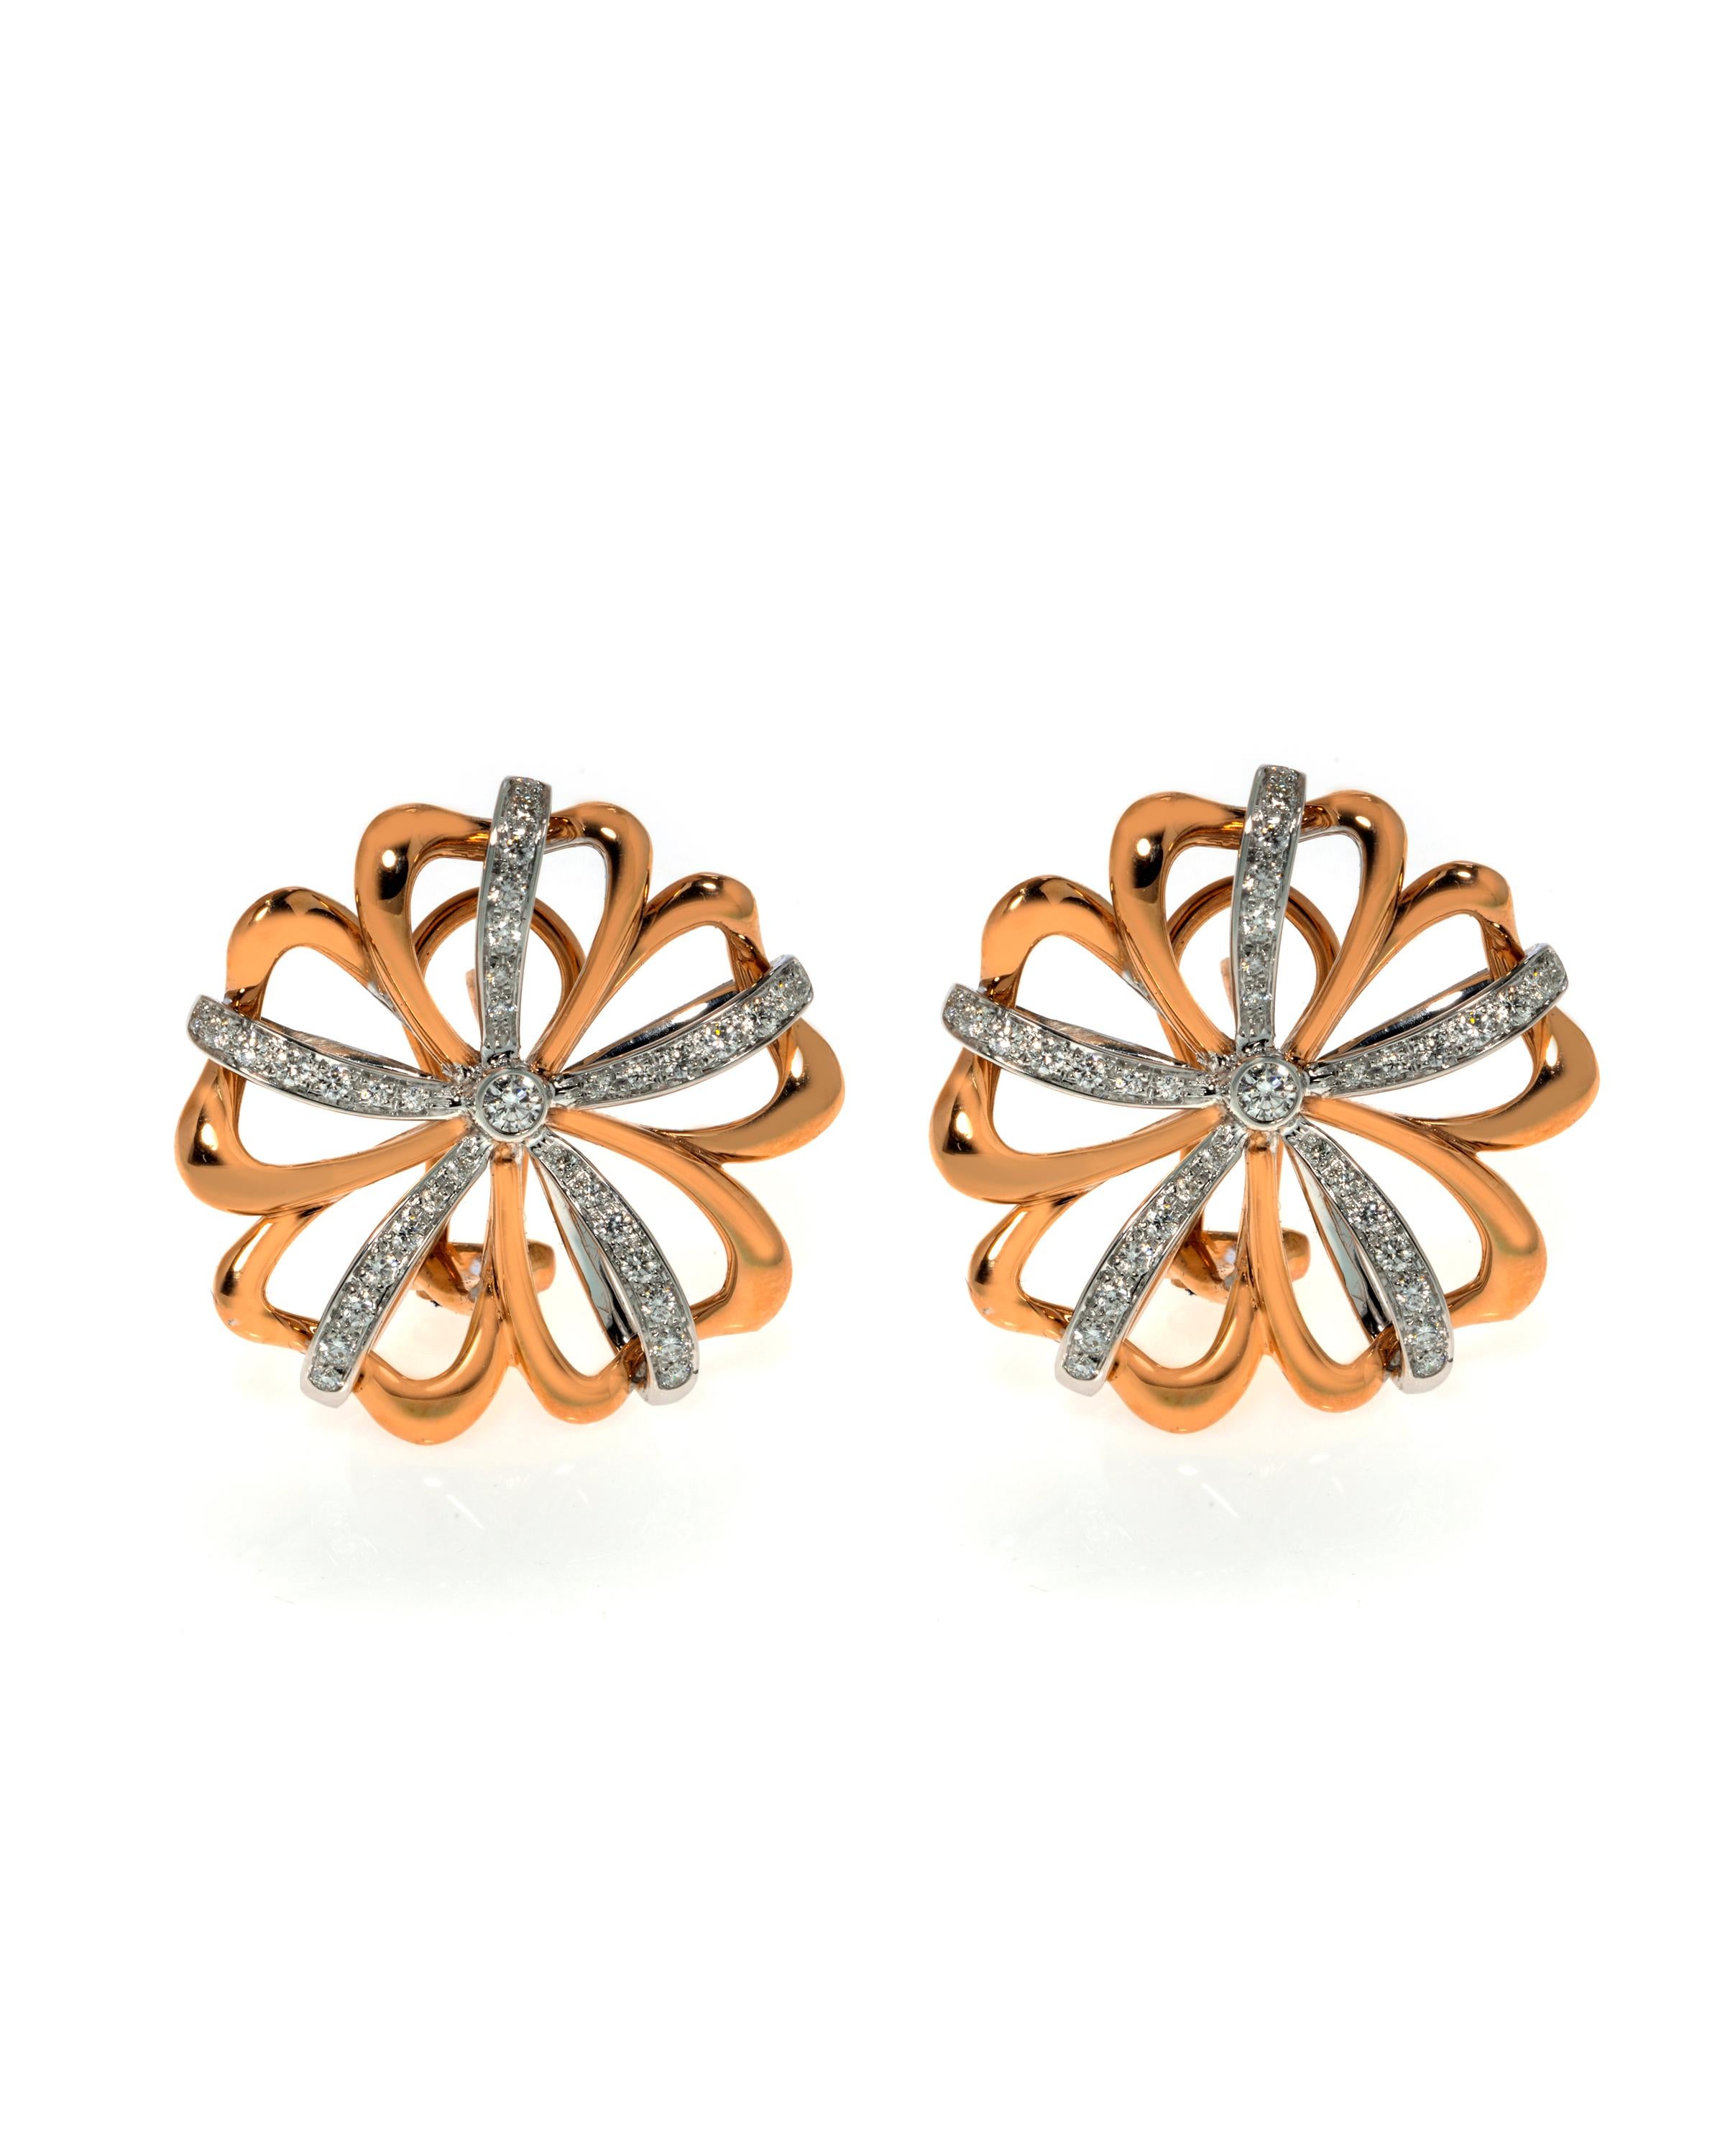 This gorgeous pair of estate earrings is finely crafted in solid 18k rose and white gold, made in the shape of beautiful flowers. The total diamond weight for the pair is 0.78 carats of VVS clarity and G color. Each earring measures 27mm. The